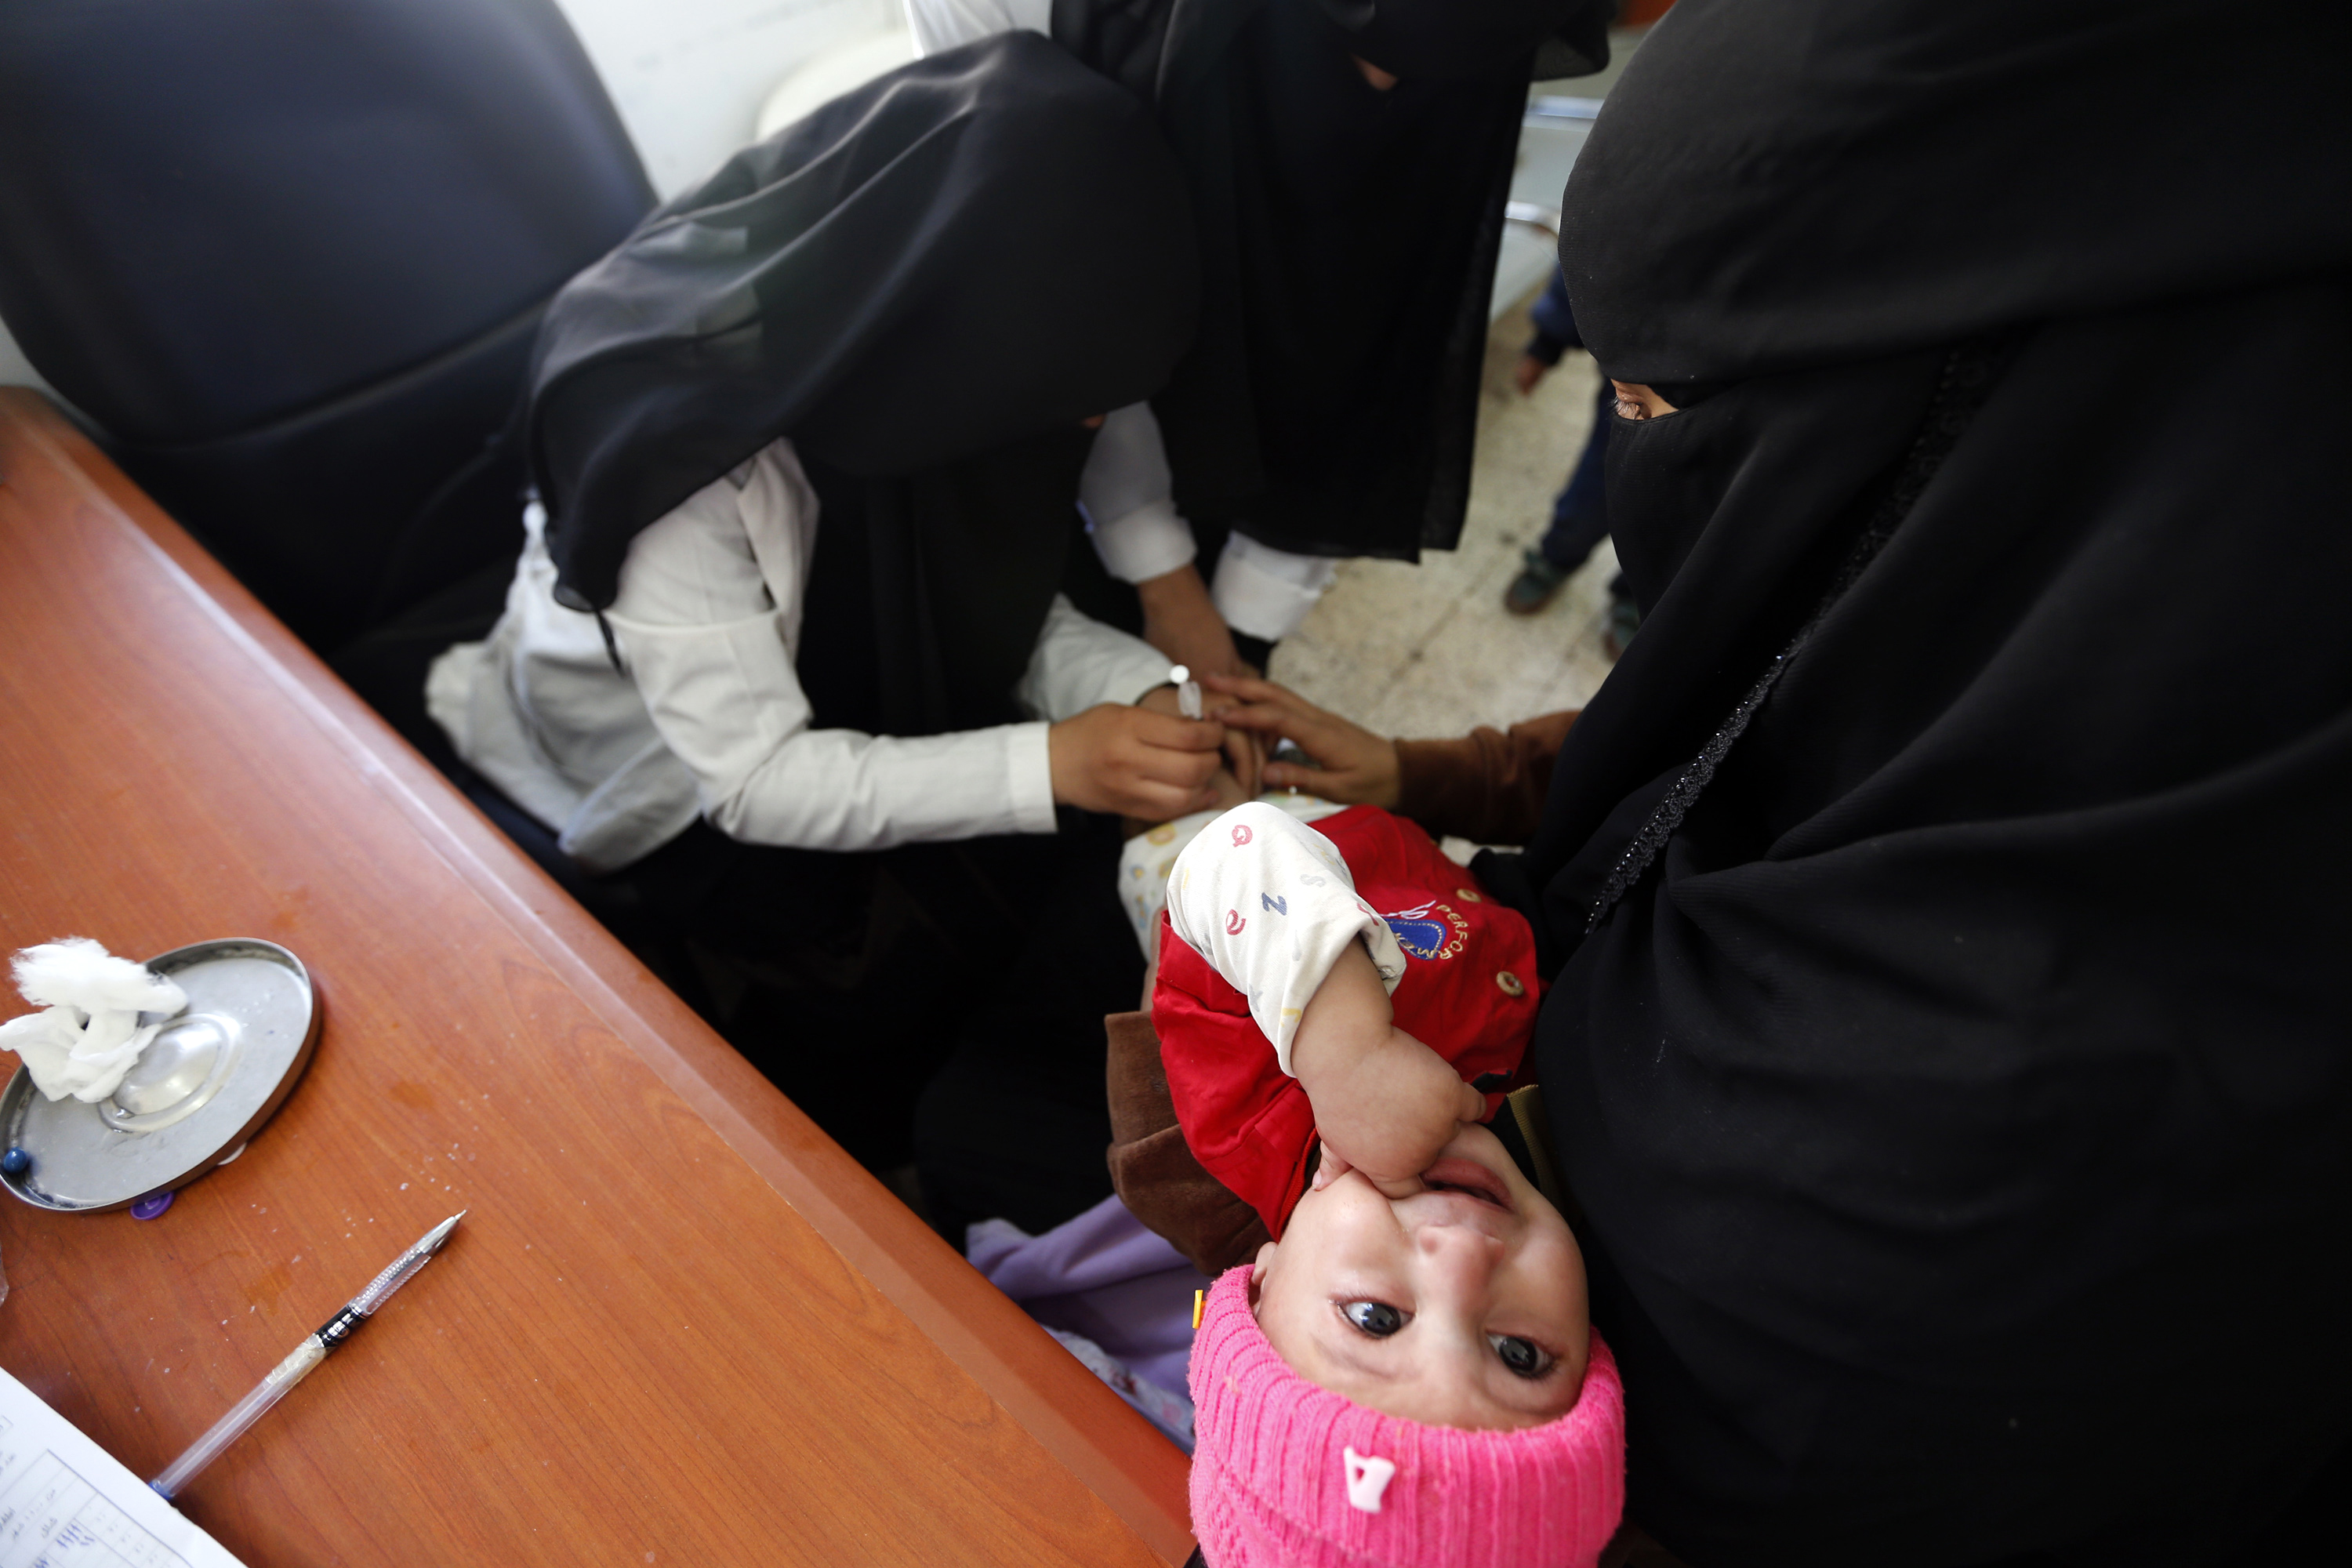 A Yemeni child receives polio vaccination during an immunisation campaign at a health center on February 20, 2017, in the capital Sanaa. / AFP PHOTO / Mohammed HUWAIS